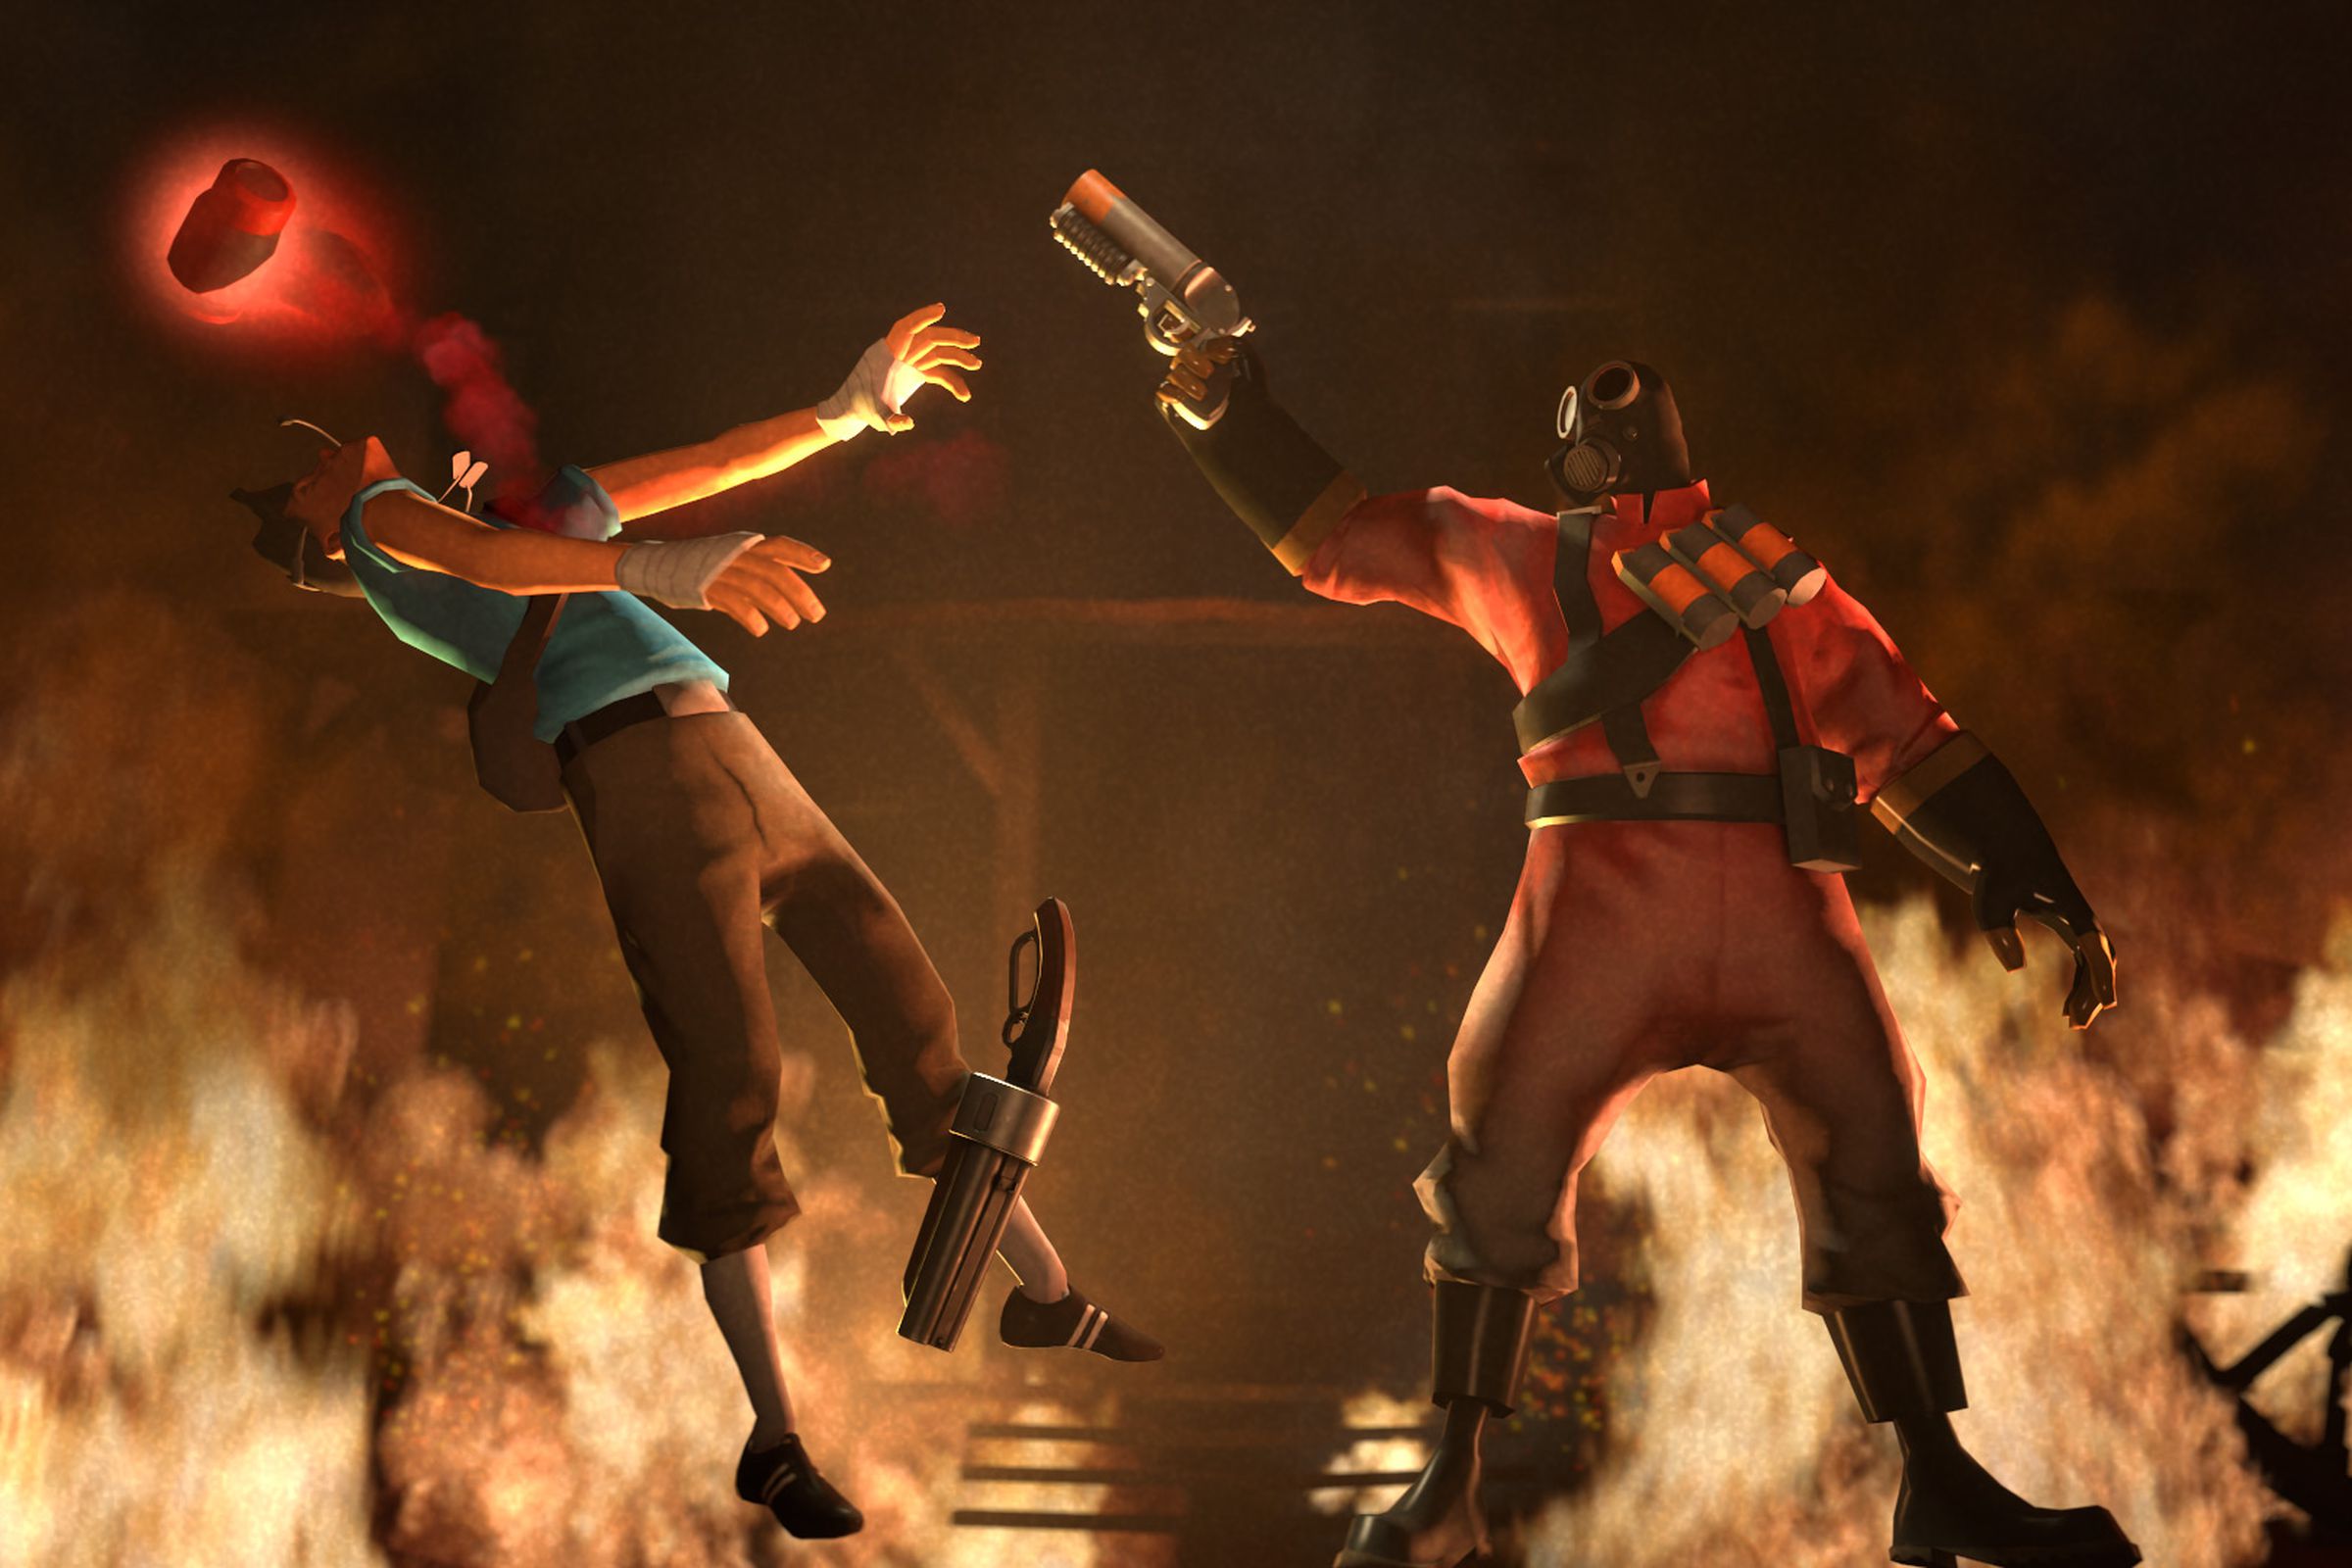 Pyro and Scout face off.